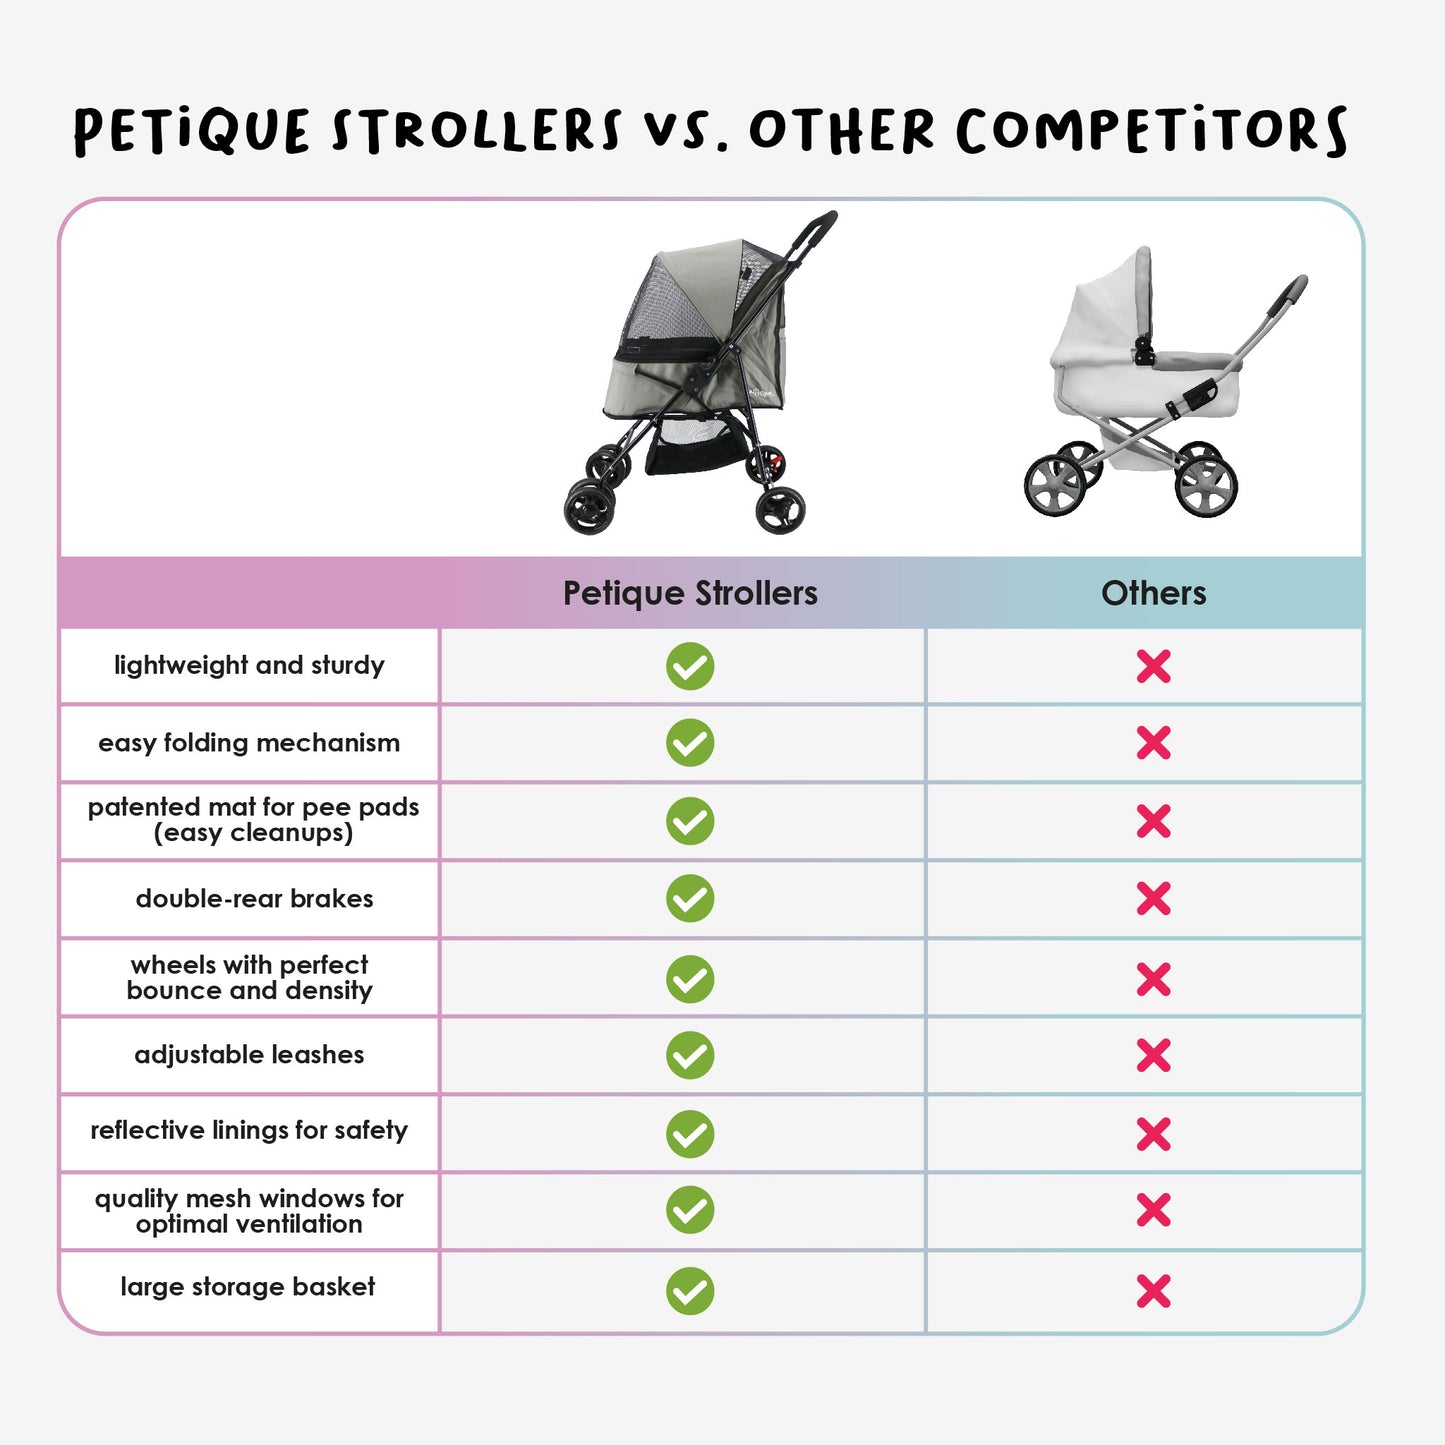 petique strollers vs other competitors